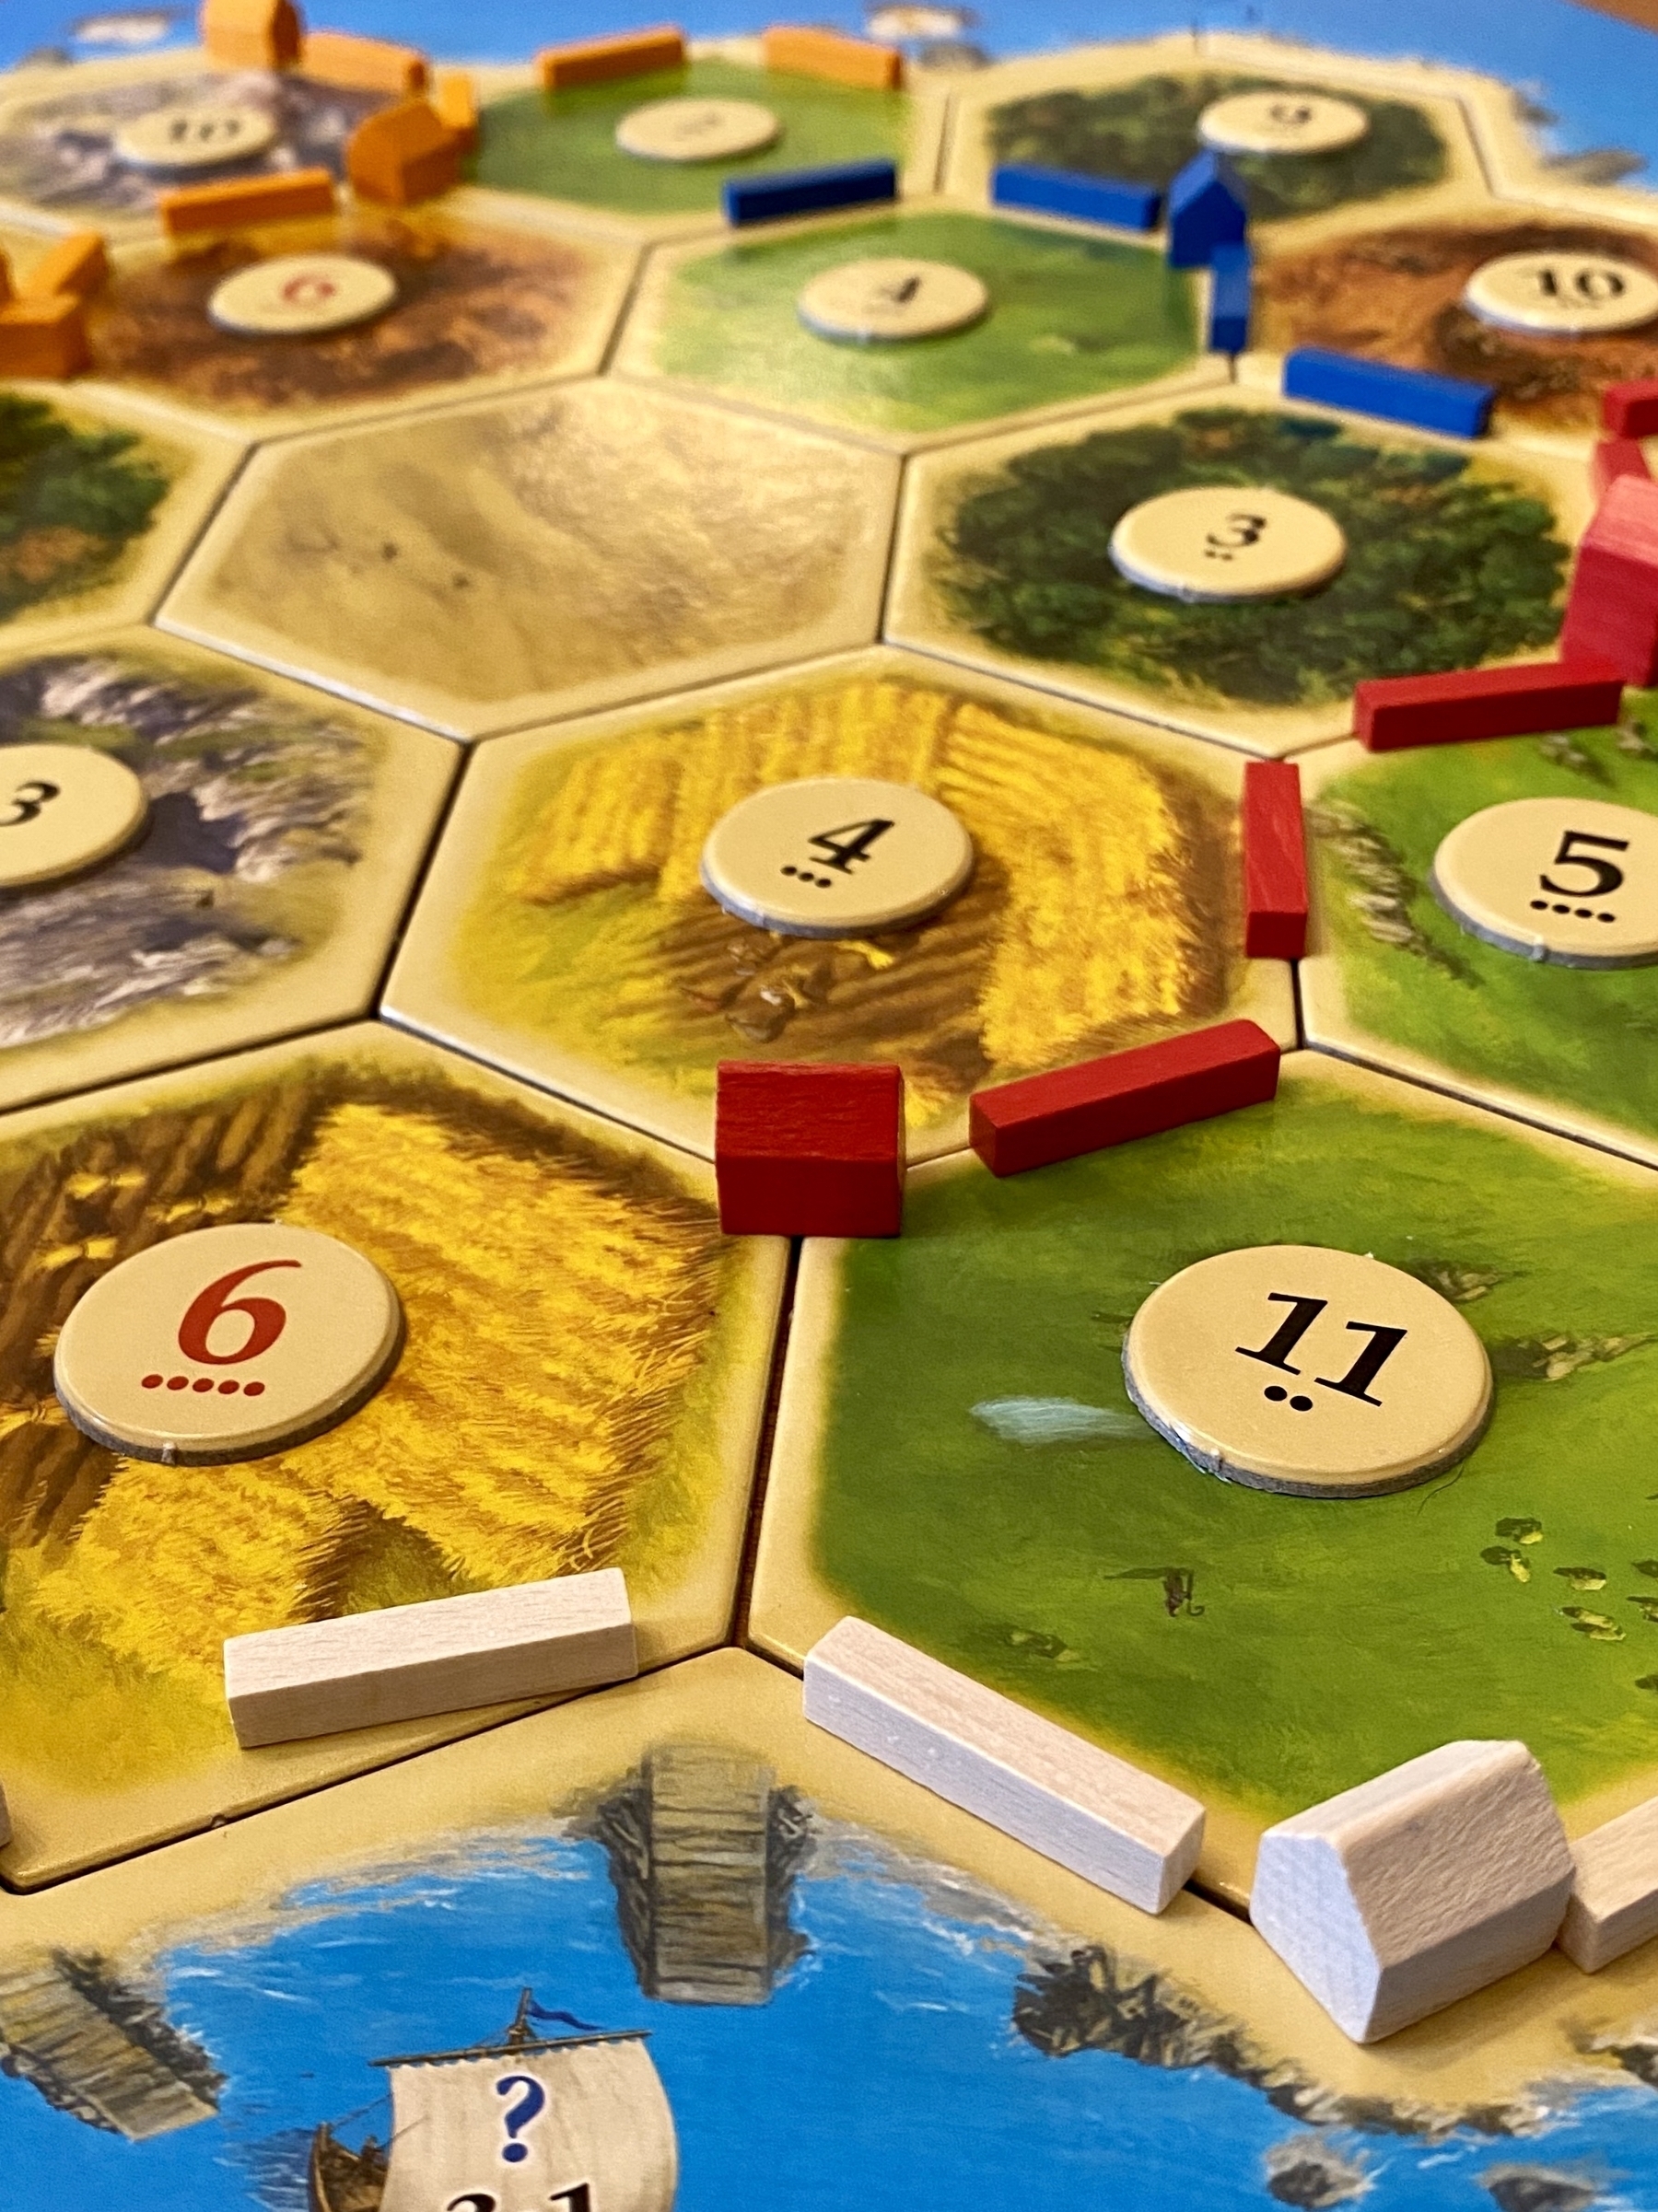 Hexes from Settlers of Catan game